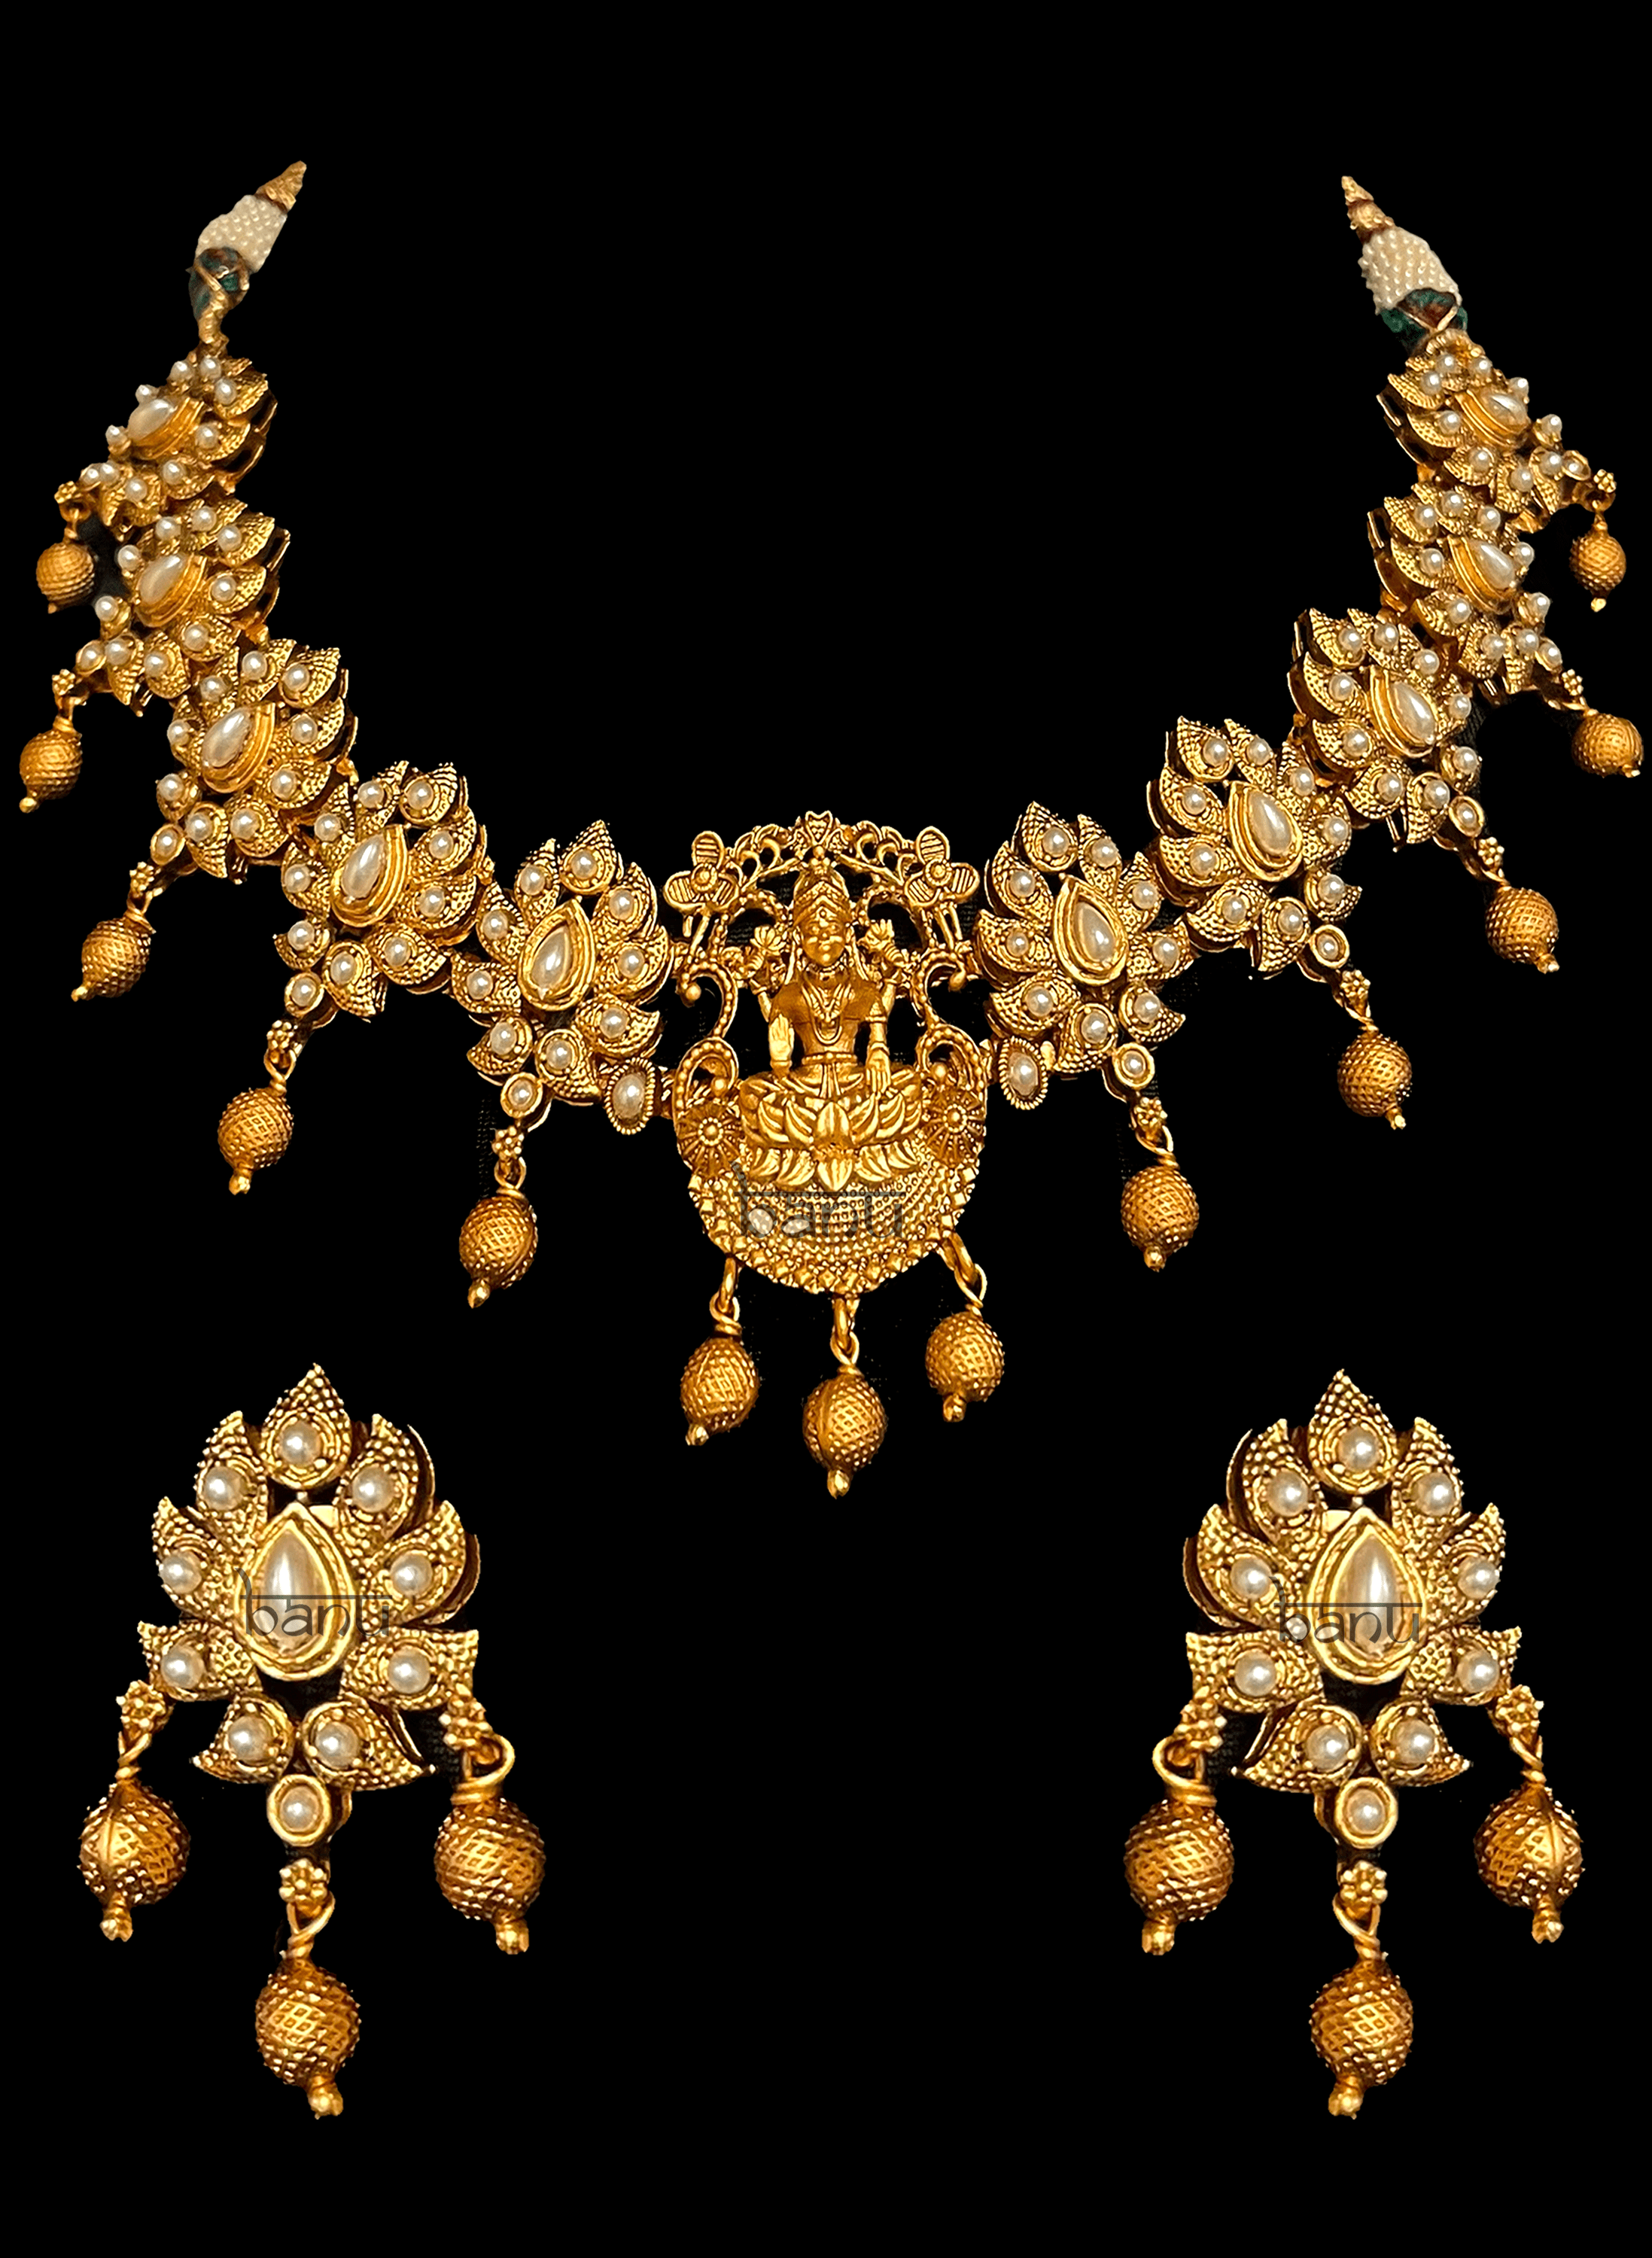 Balan - Traditional South Indian Temple Jewelry Set w/ Pearls, Ruby & Emeralds